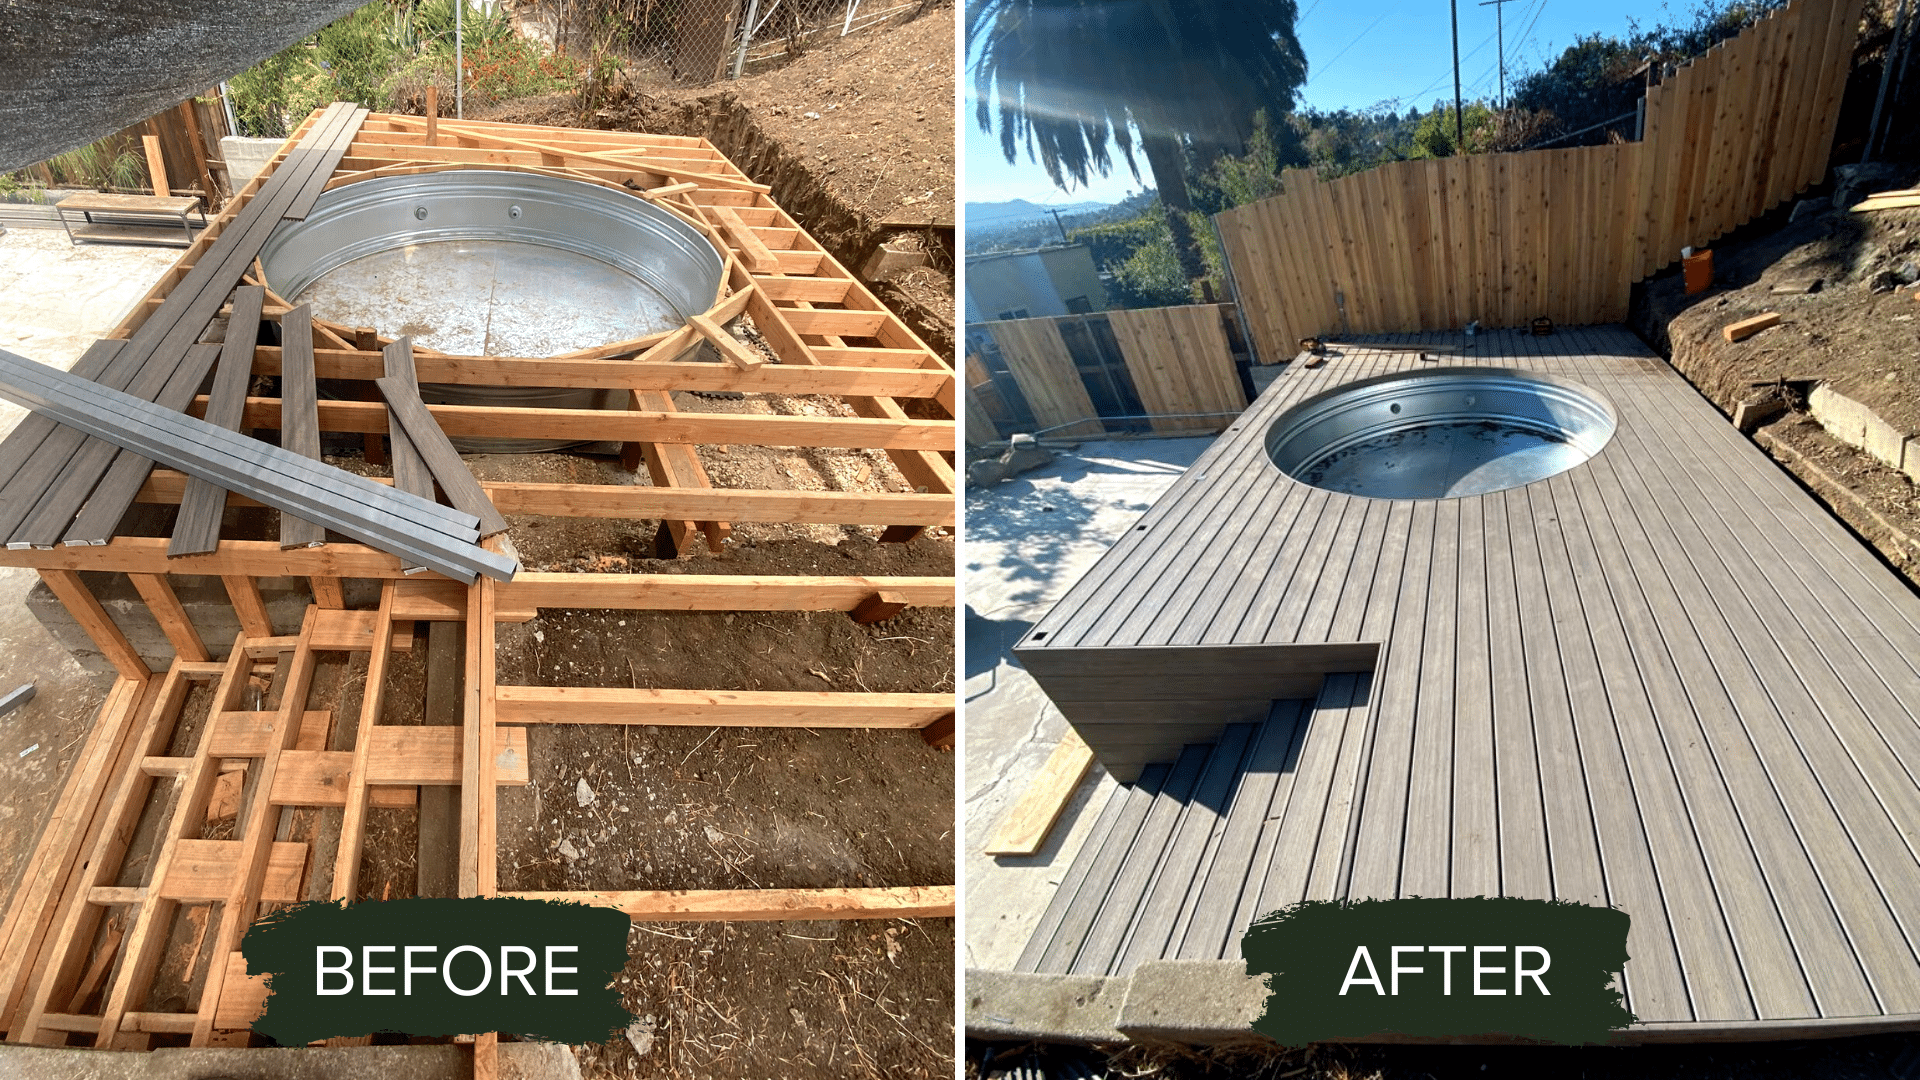 BEFORE AND AFTER POOL DECK